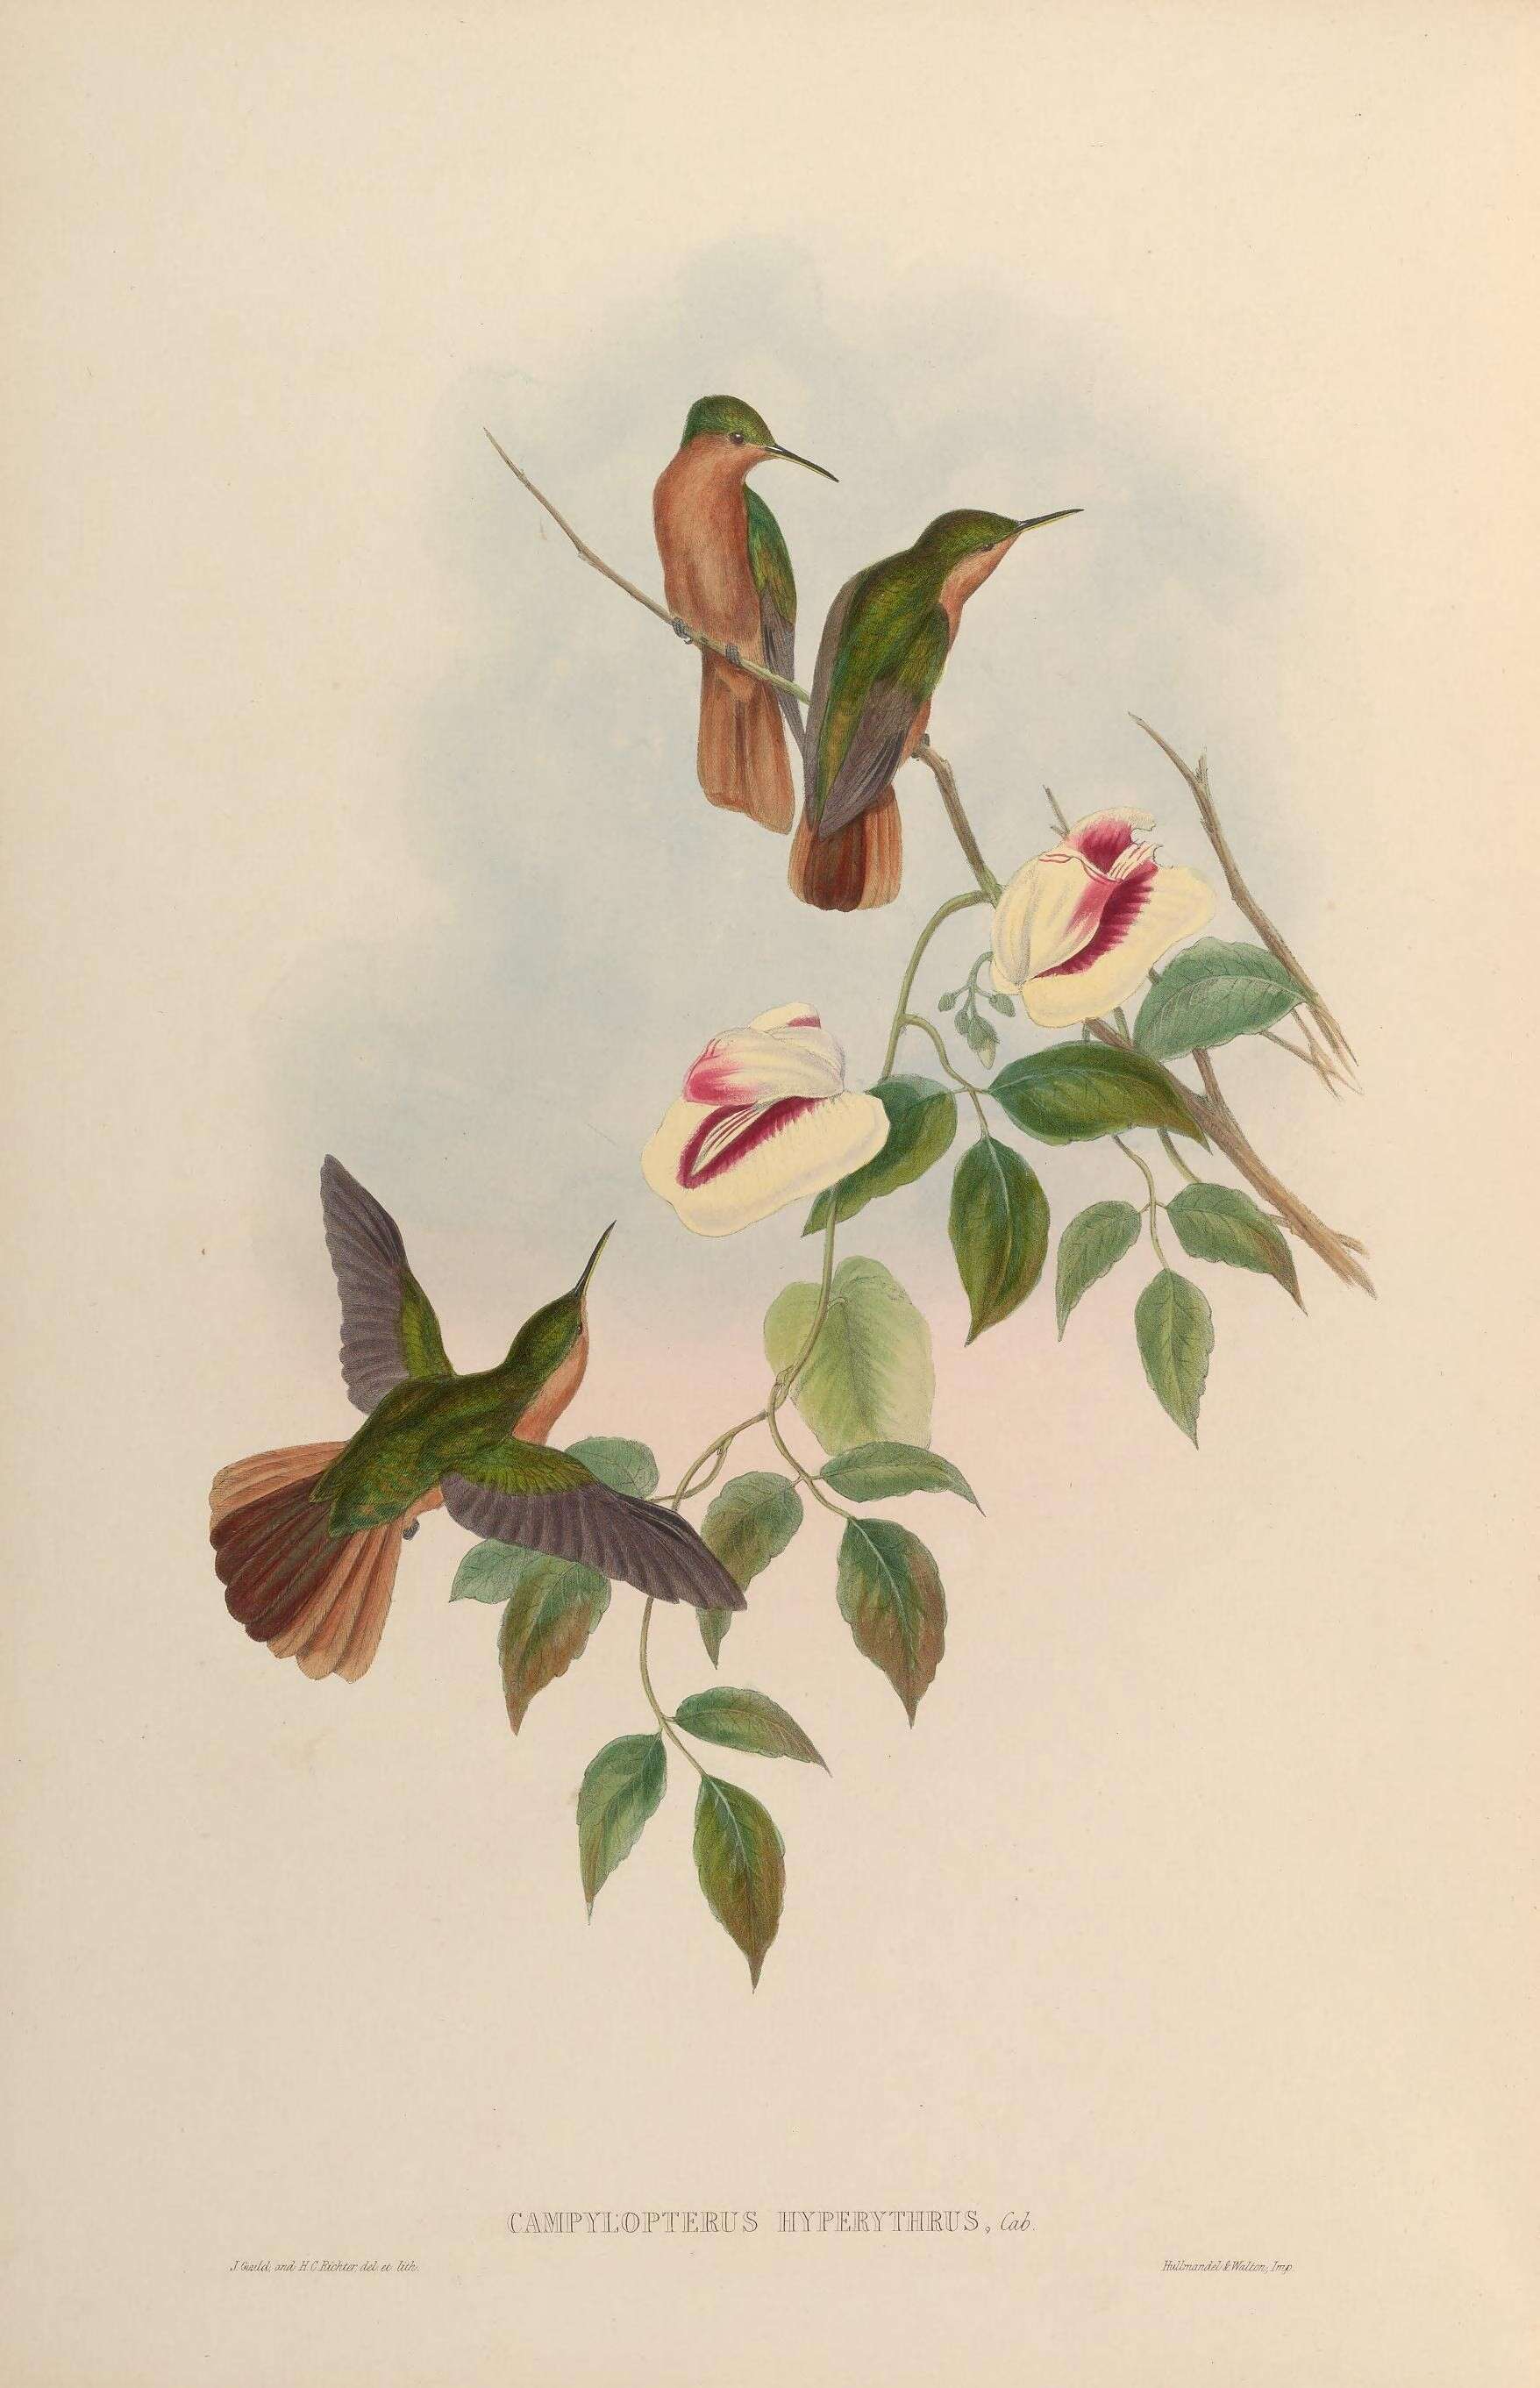 Image of Rufous-breasted Sabrewing